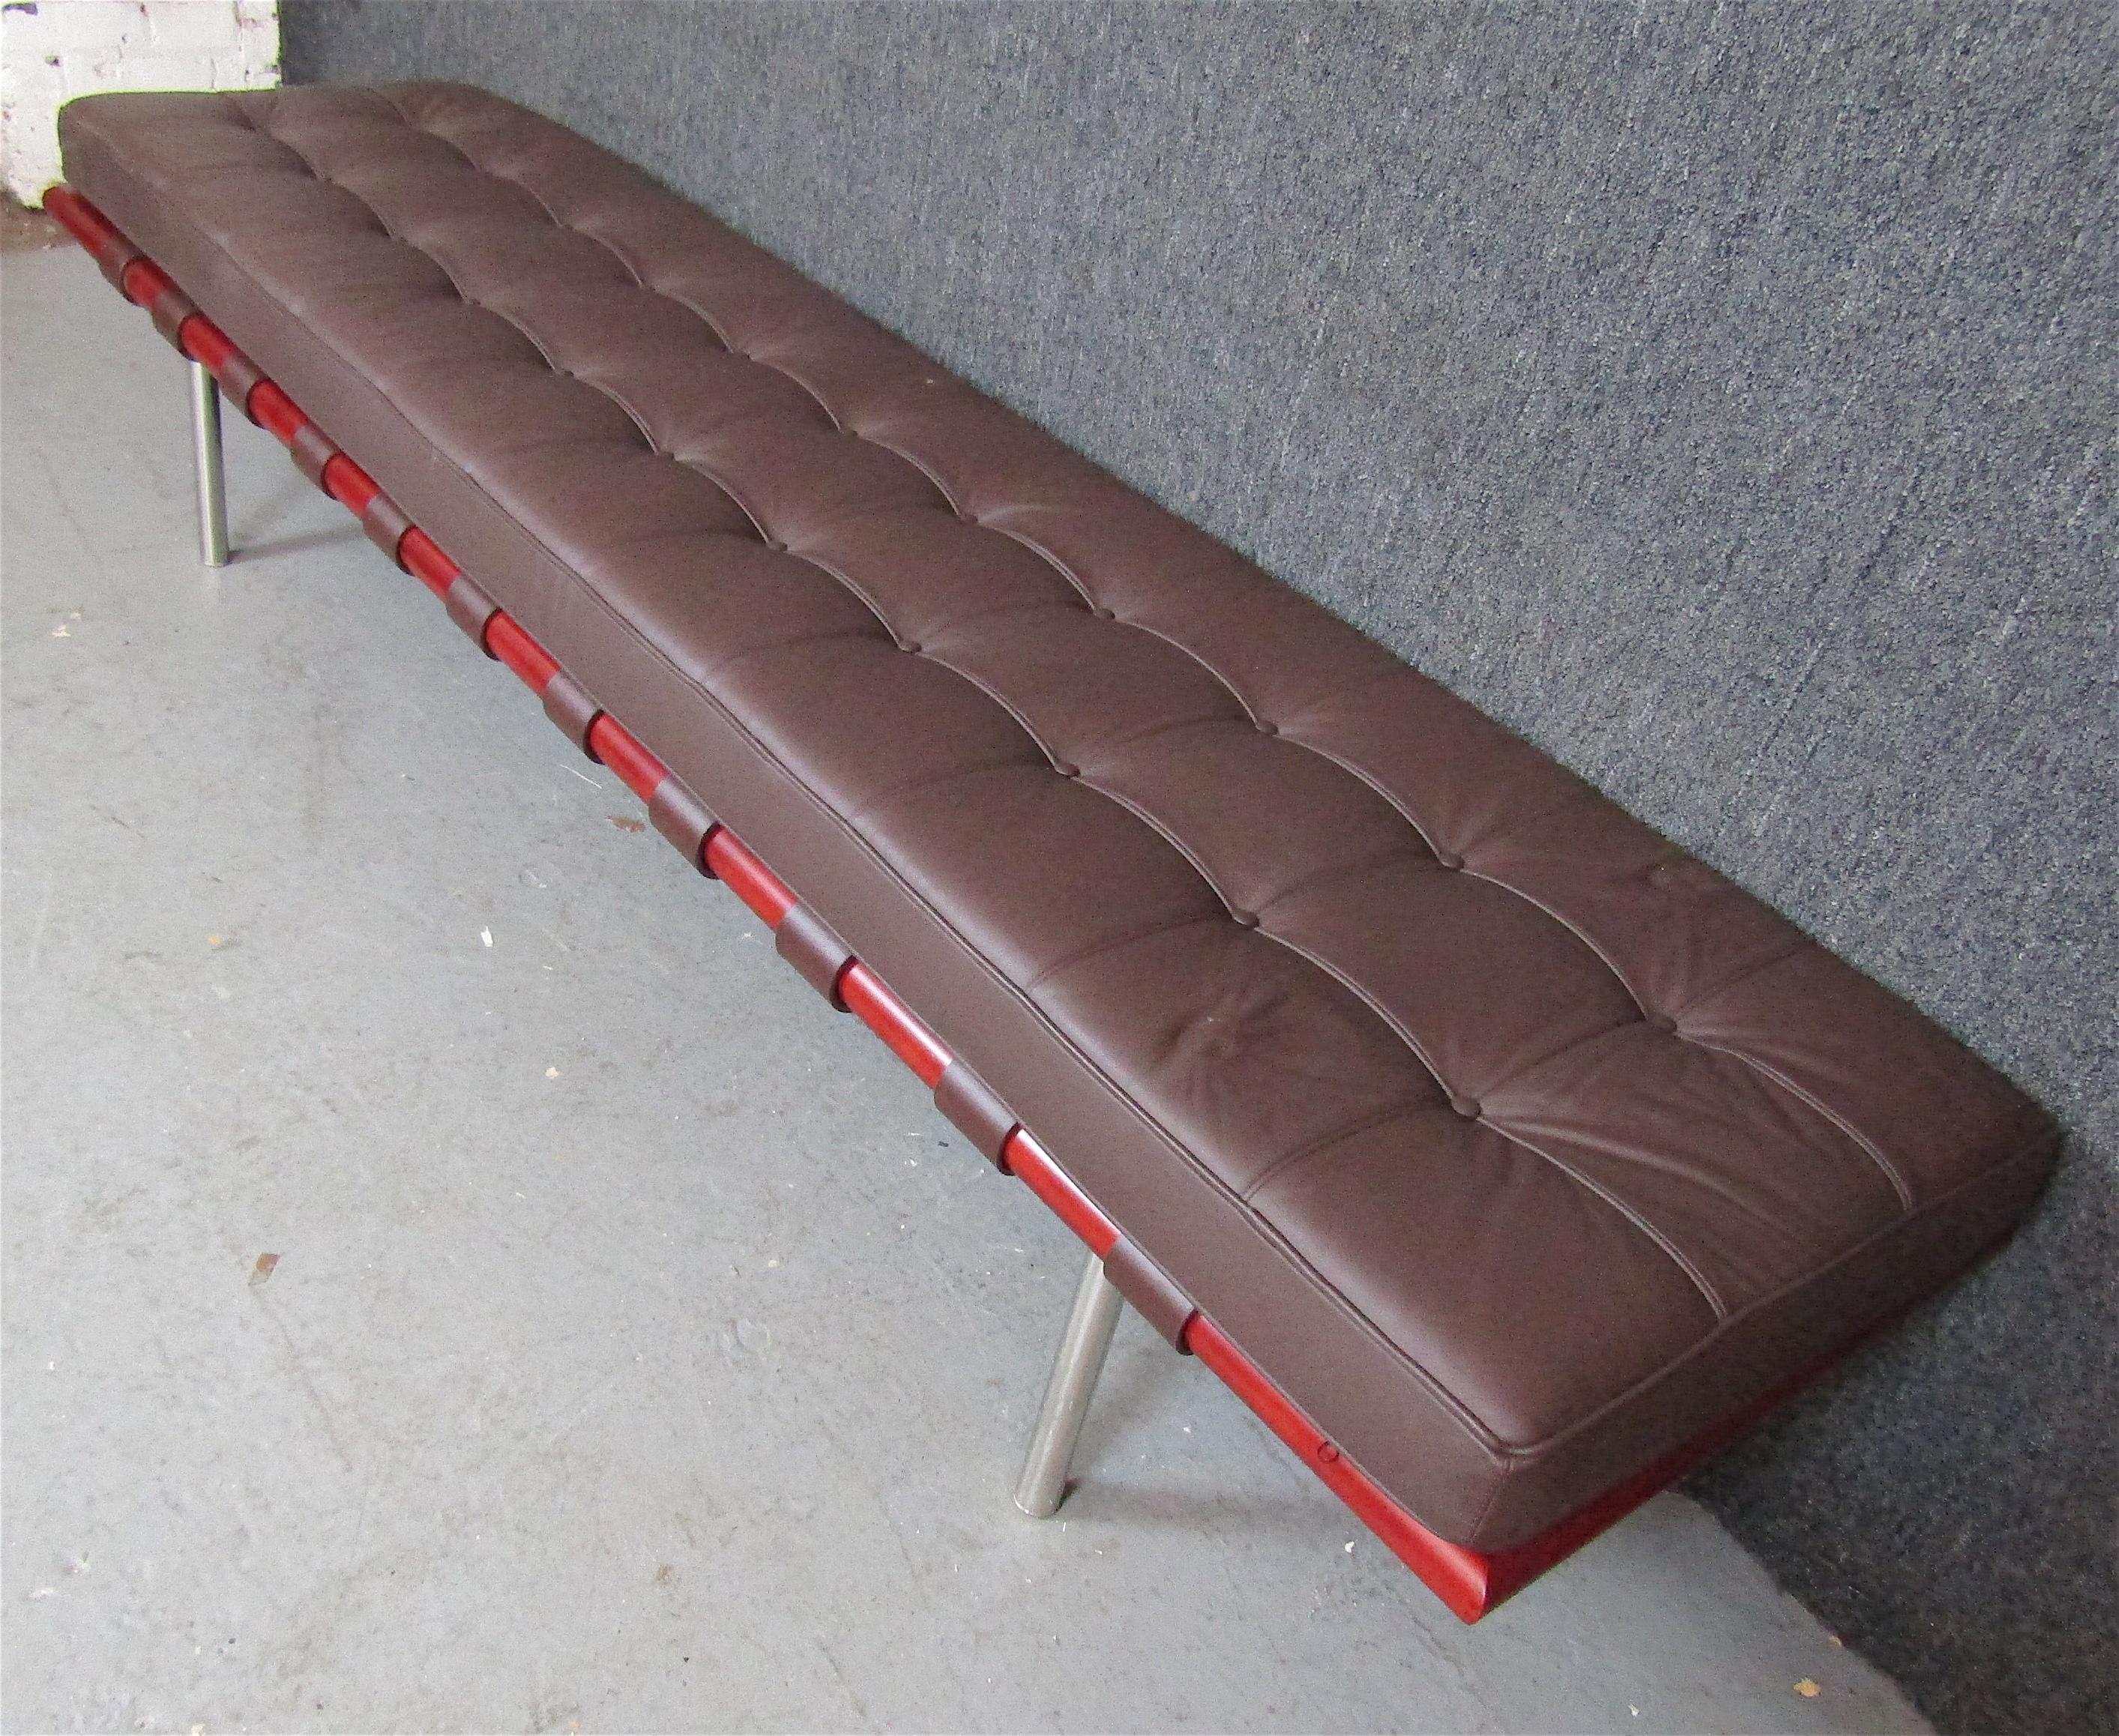 The Barcelona Bench was designed by German-American architect and designer, Mies van der Rohe, in 1930. This copy is perfect for your home or office, with tufted cushion on a sturdy base.
Please confirm location NY or NJ